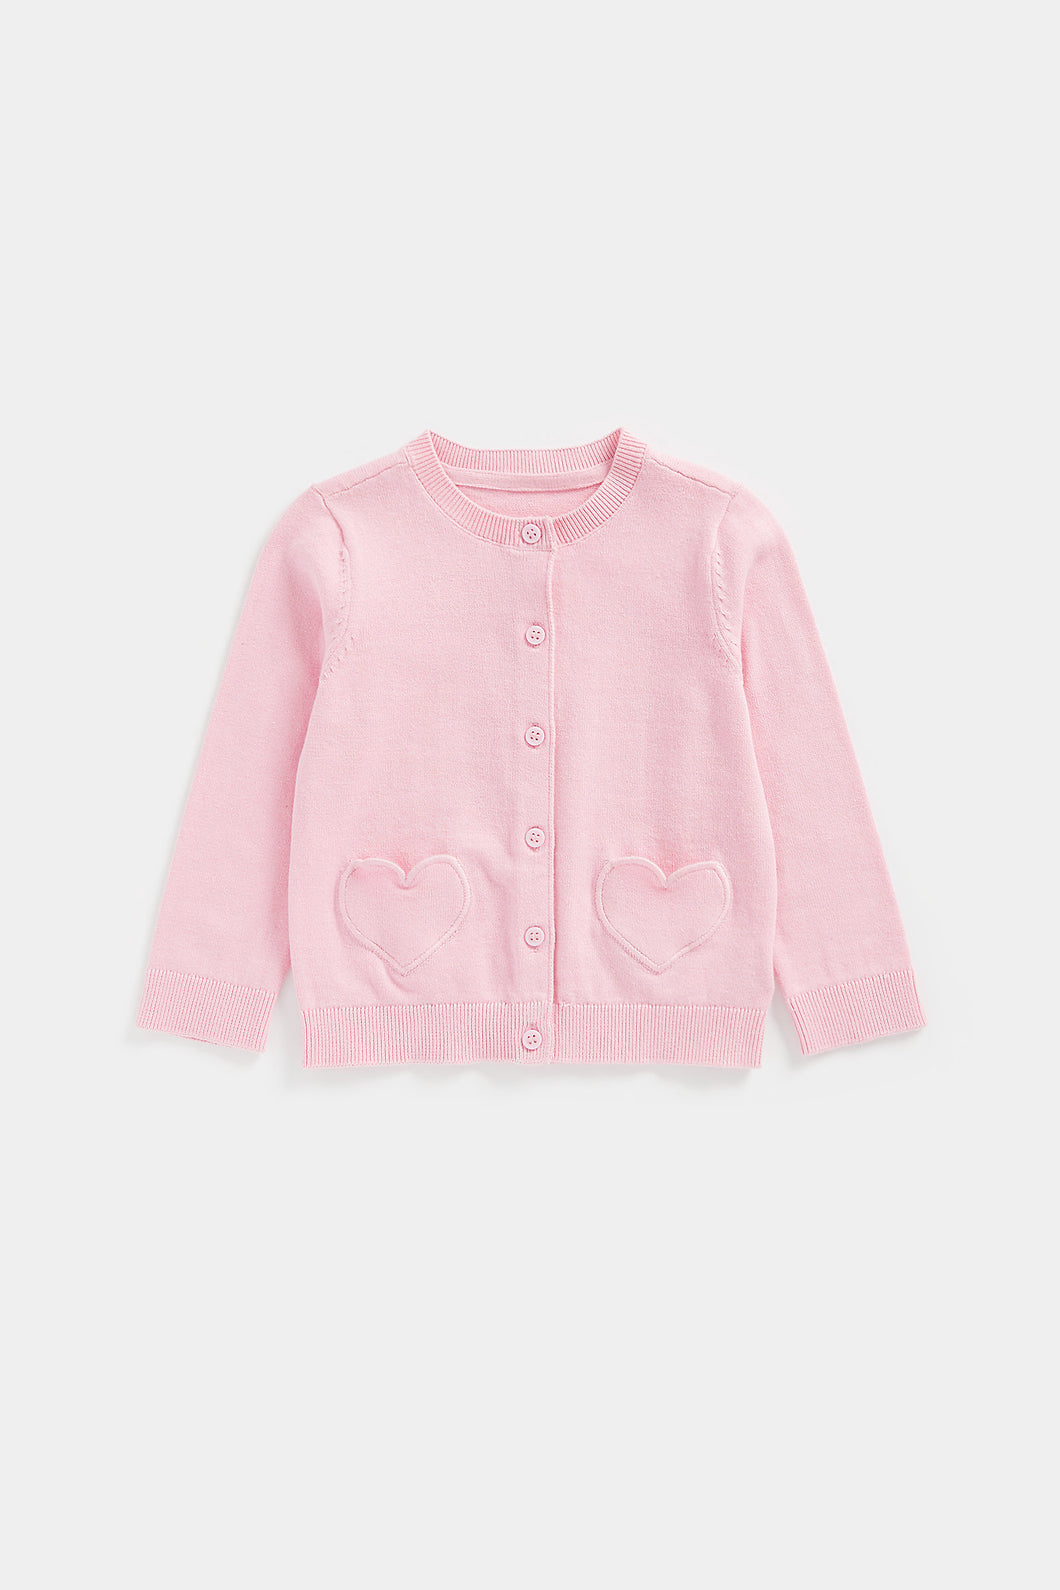 Mothercare Pink Heart Cardigan